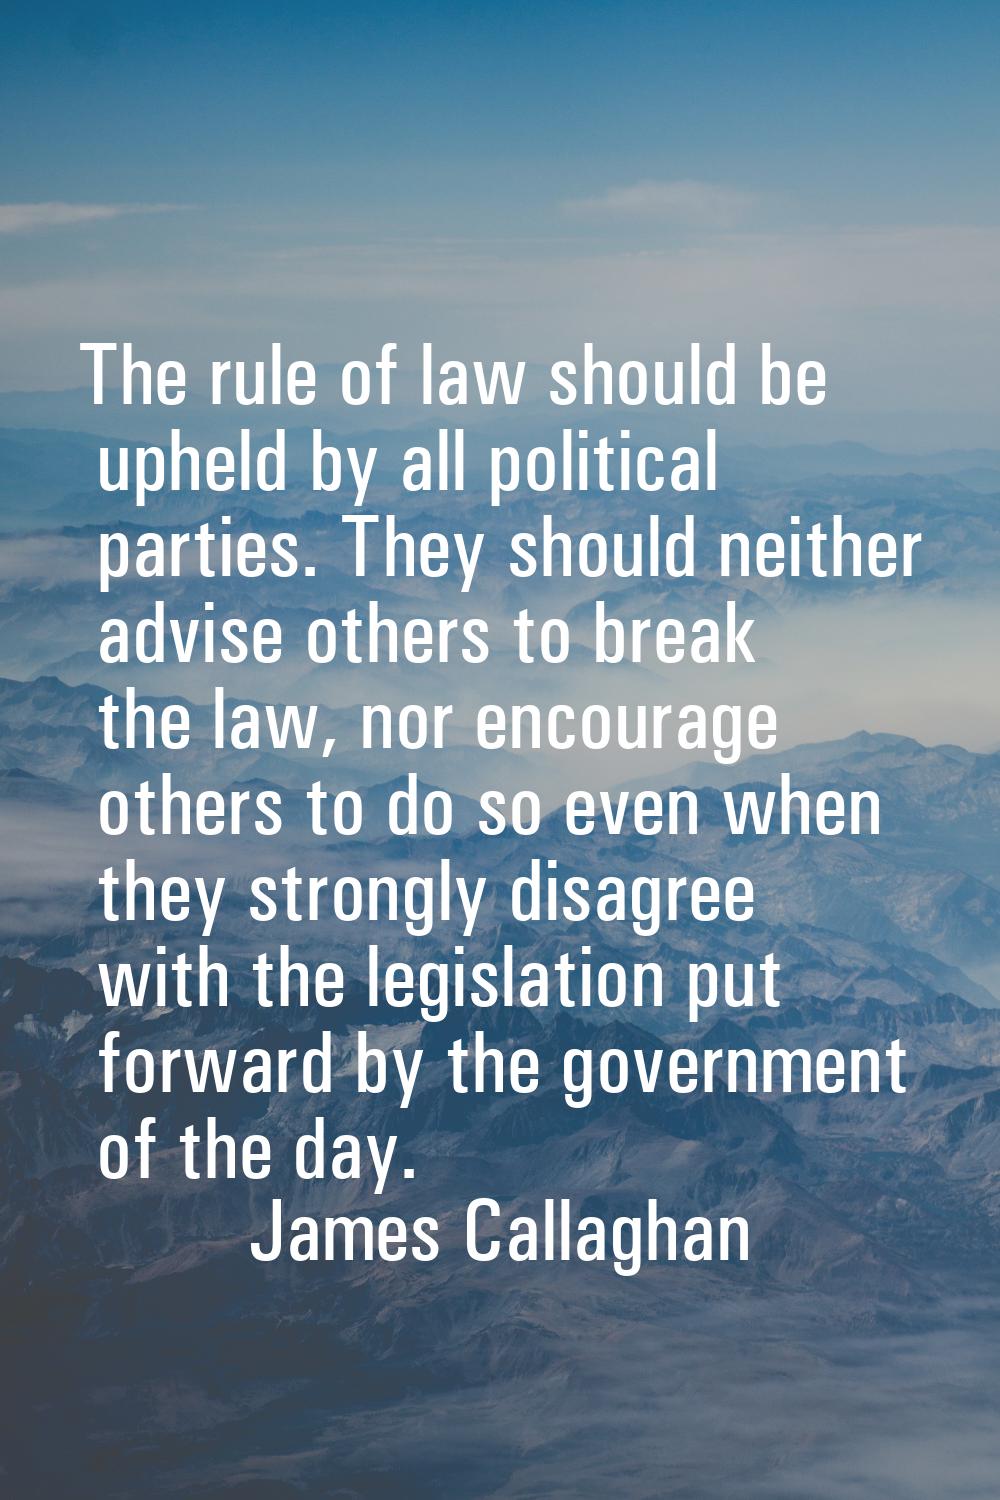 The rule of law should be upheld by all political parties. They should neither advise others to bre